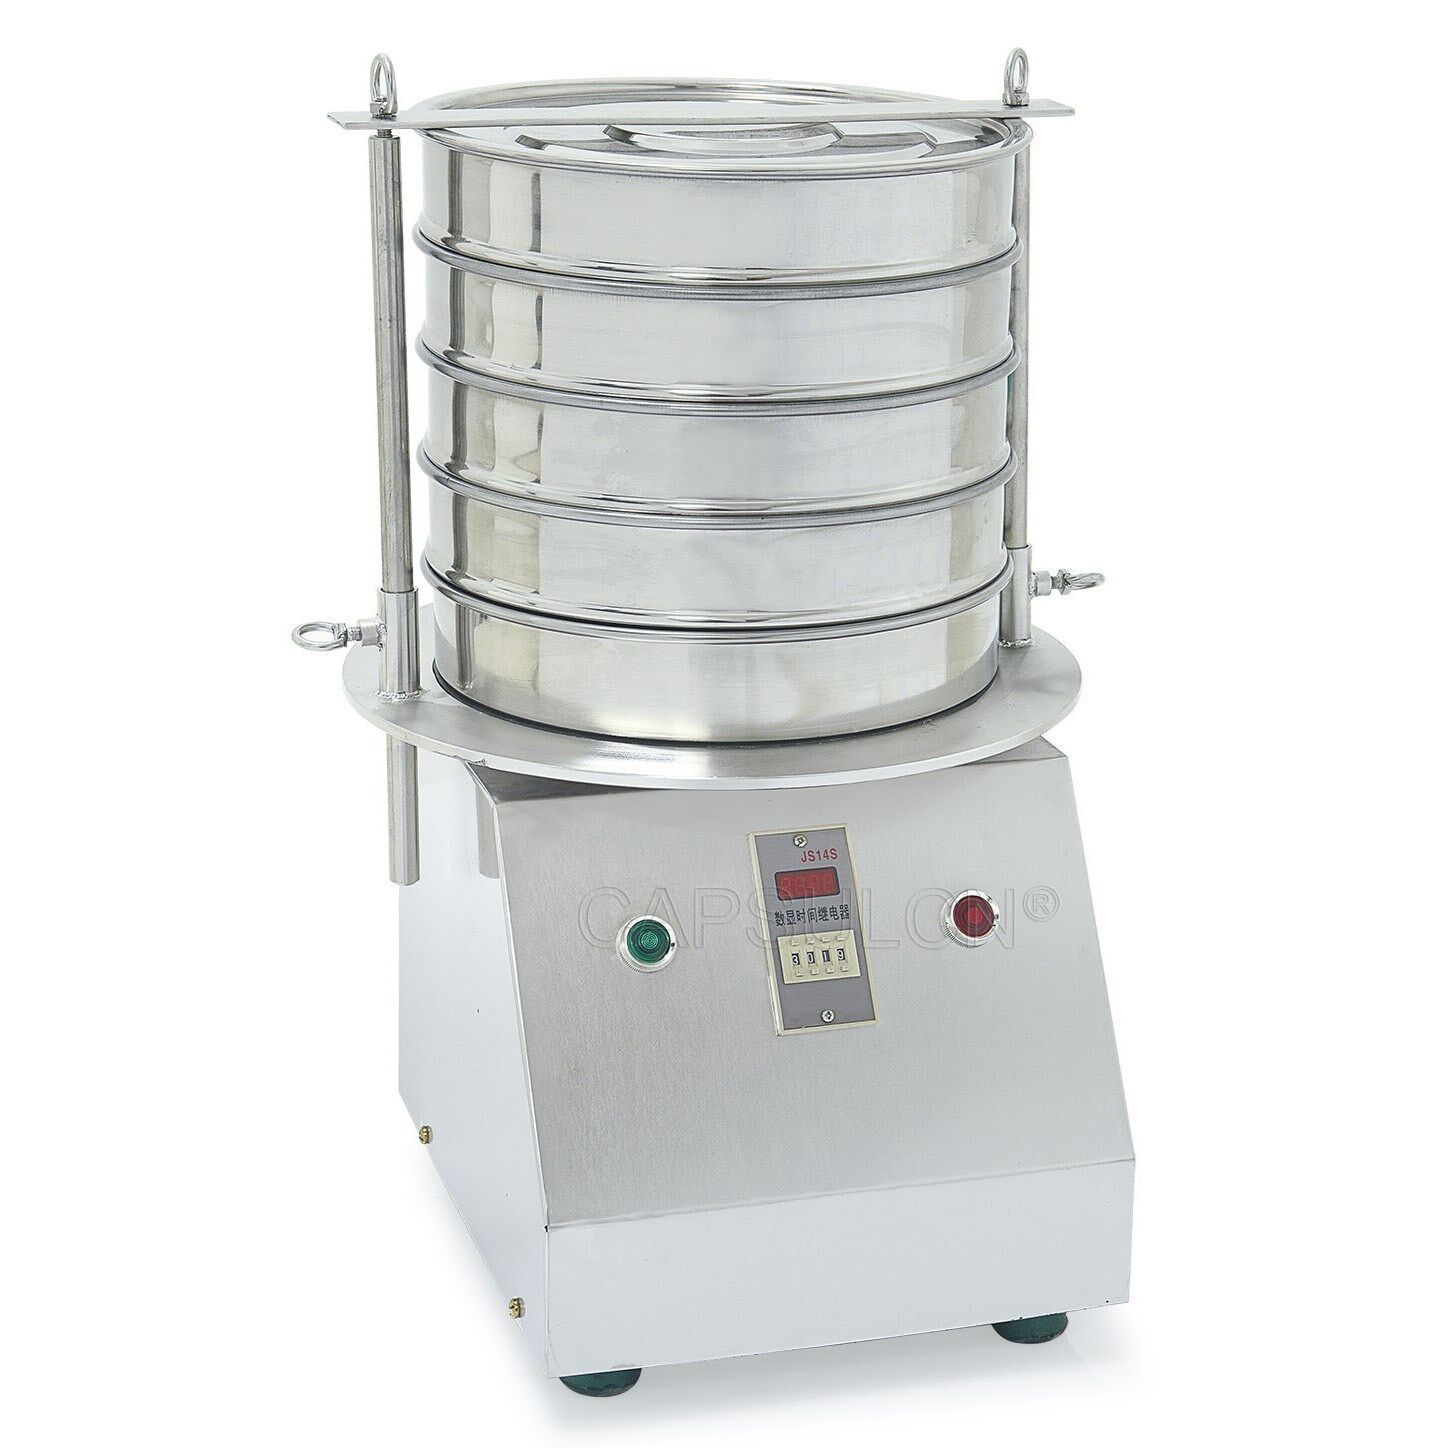 What is a electric sifter shaker?